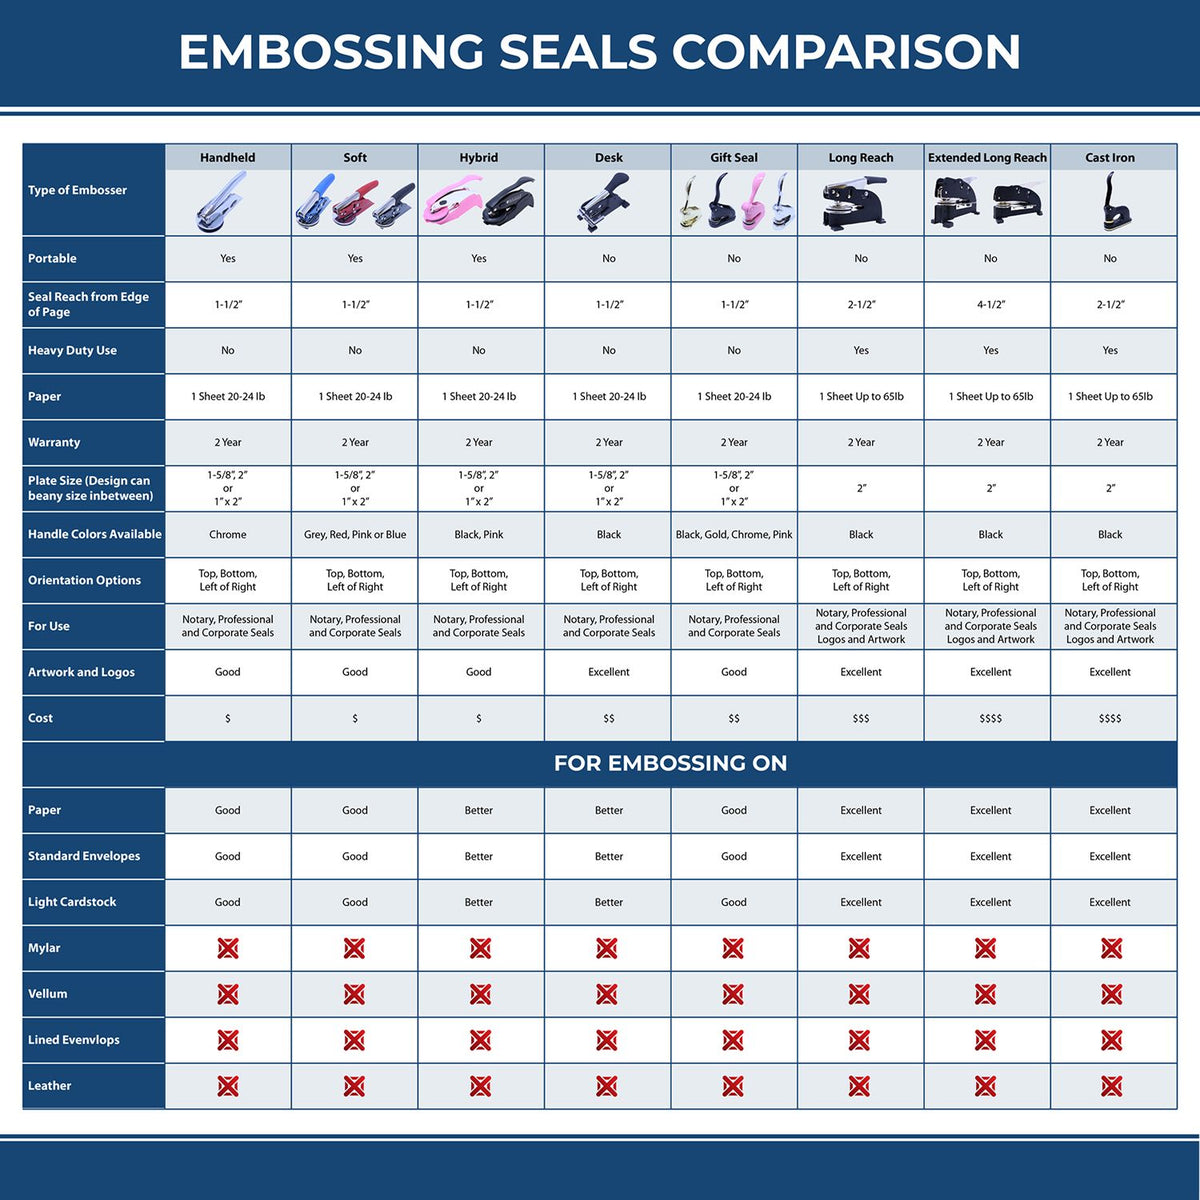 A comparison chart for the different types of mount models available for the Soft Pocket Nebraska Landscape Architect Embosser.